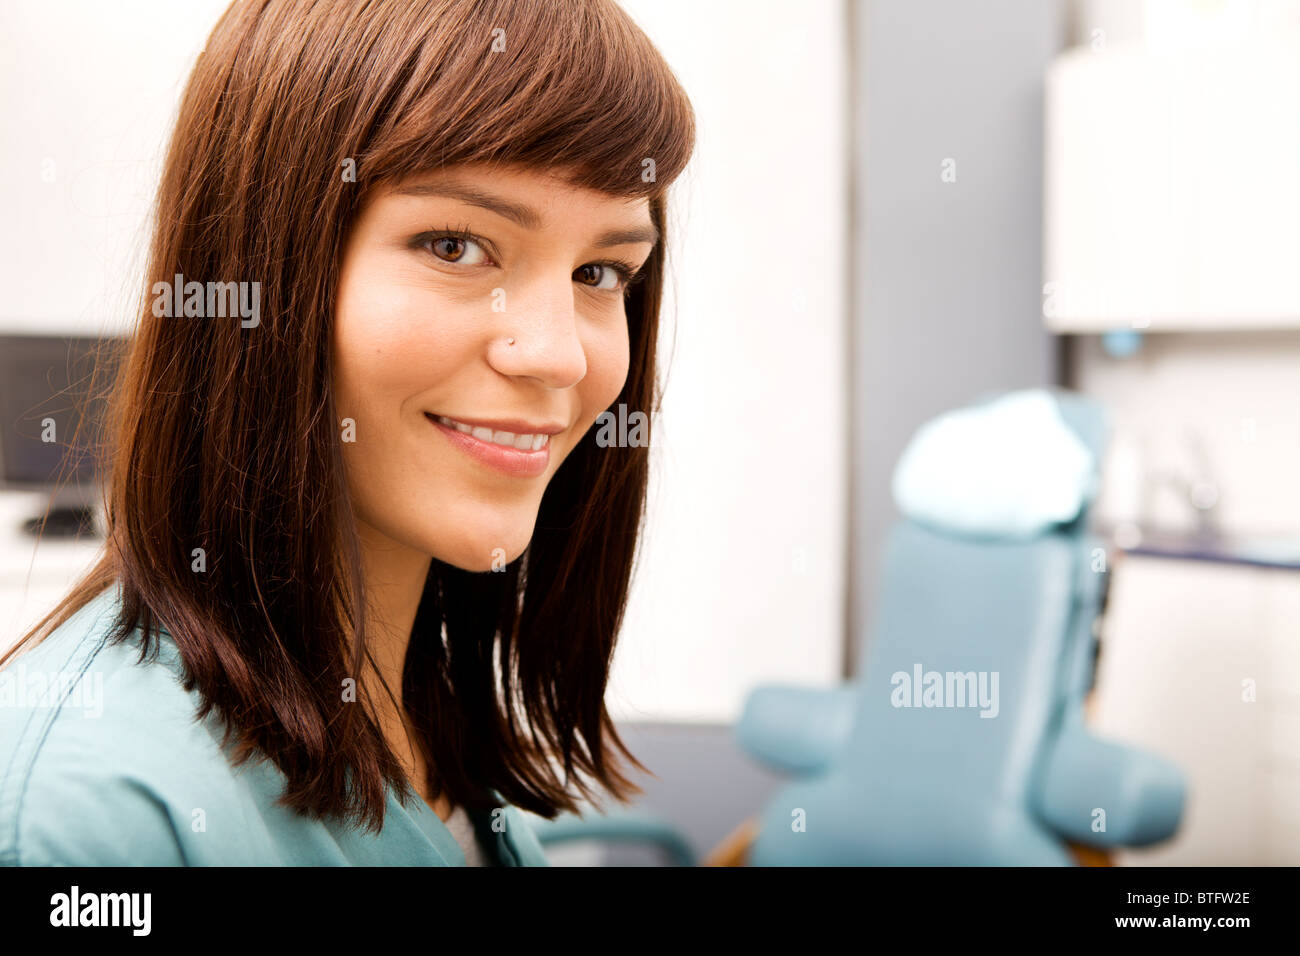 A portrait of a dental hygienist in front of a dental chair Stock Photo